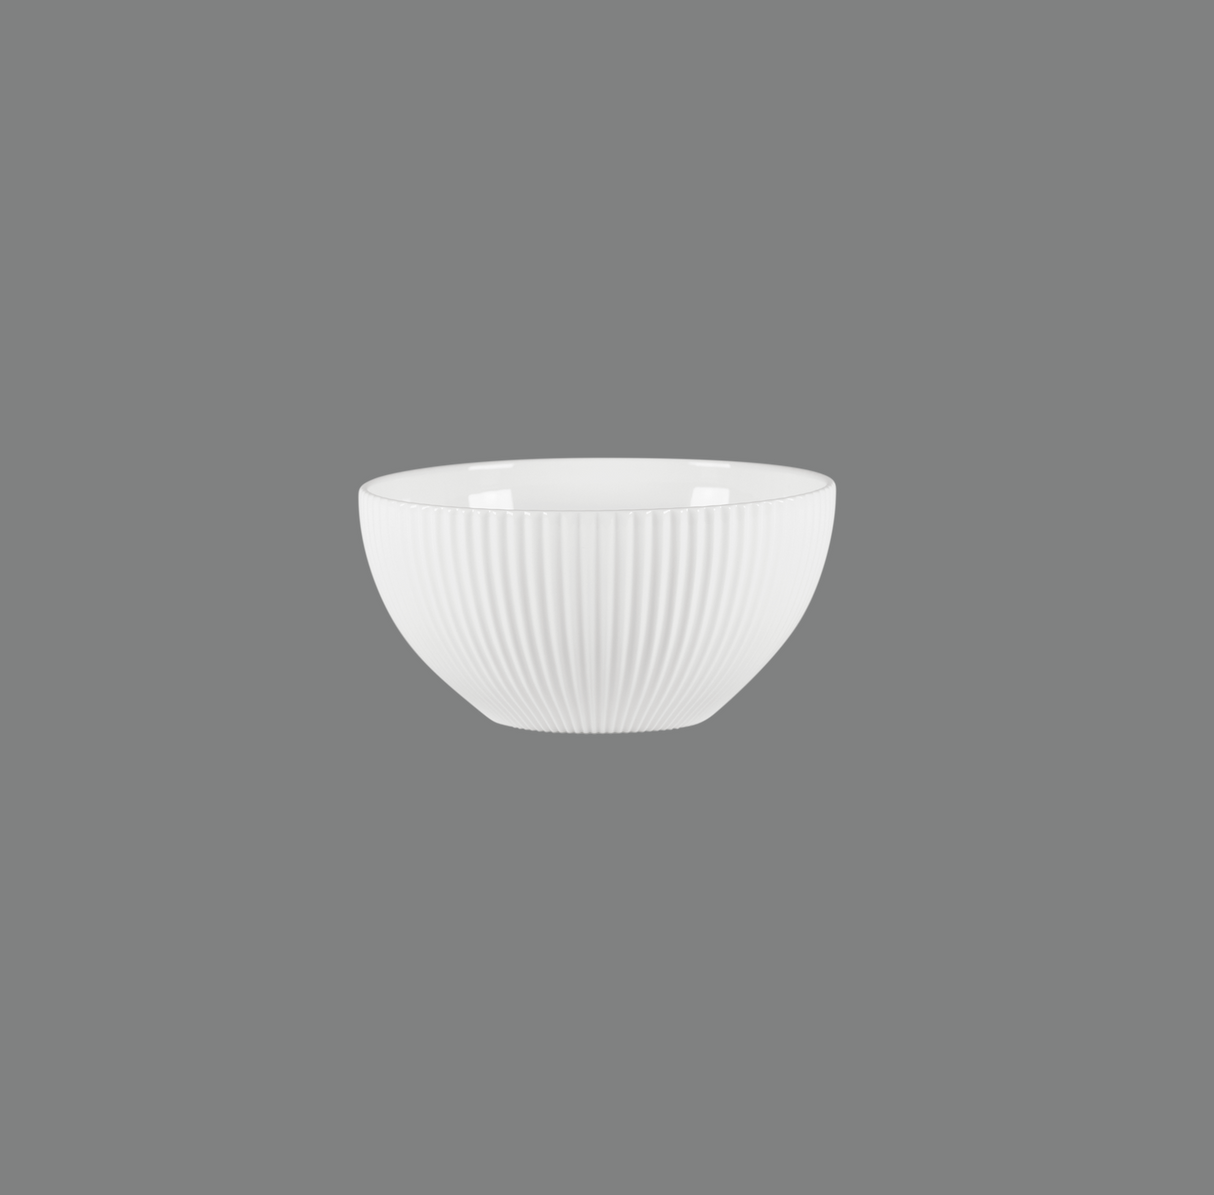 Spectra Round Bowl - 500ml: Pack of 12